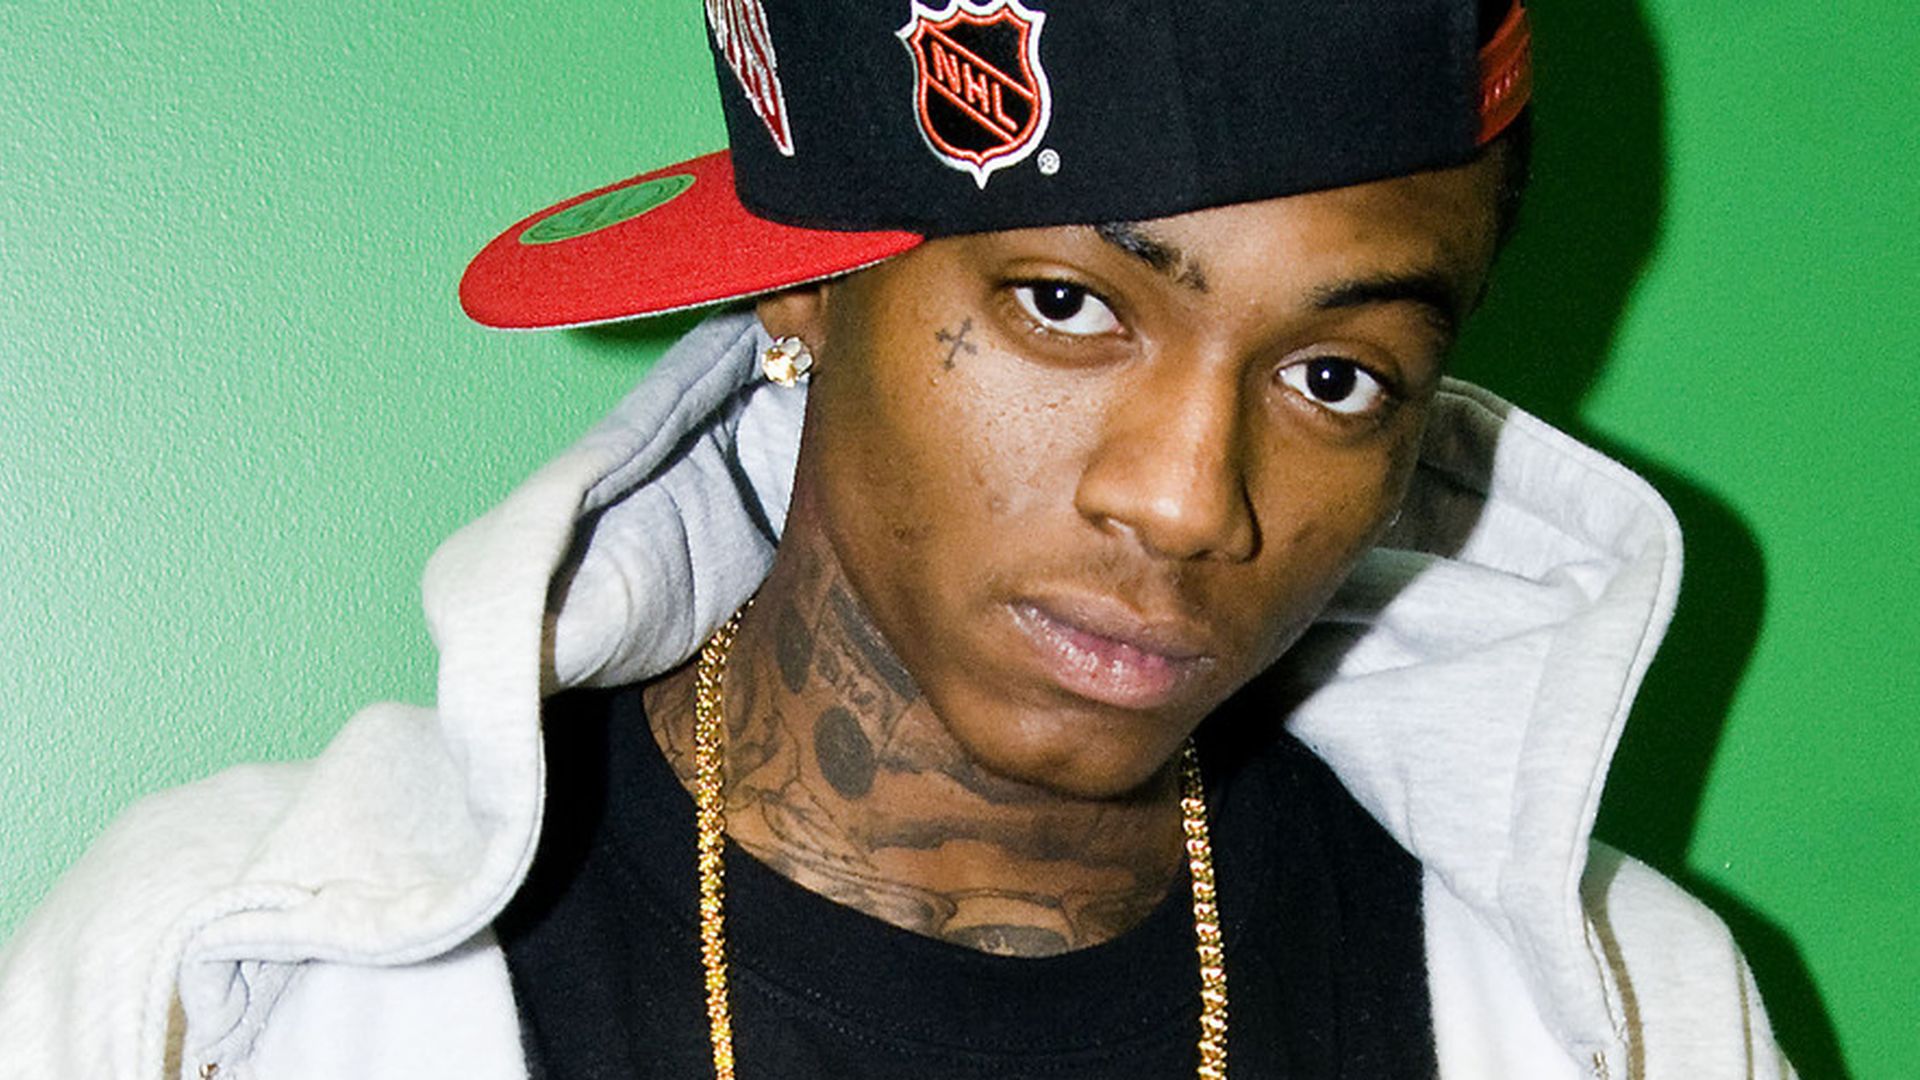 More Pictures Of Soulja Boy. 